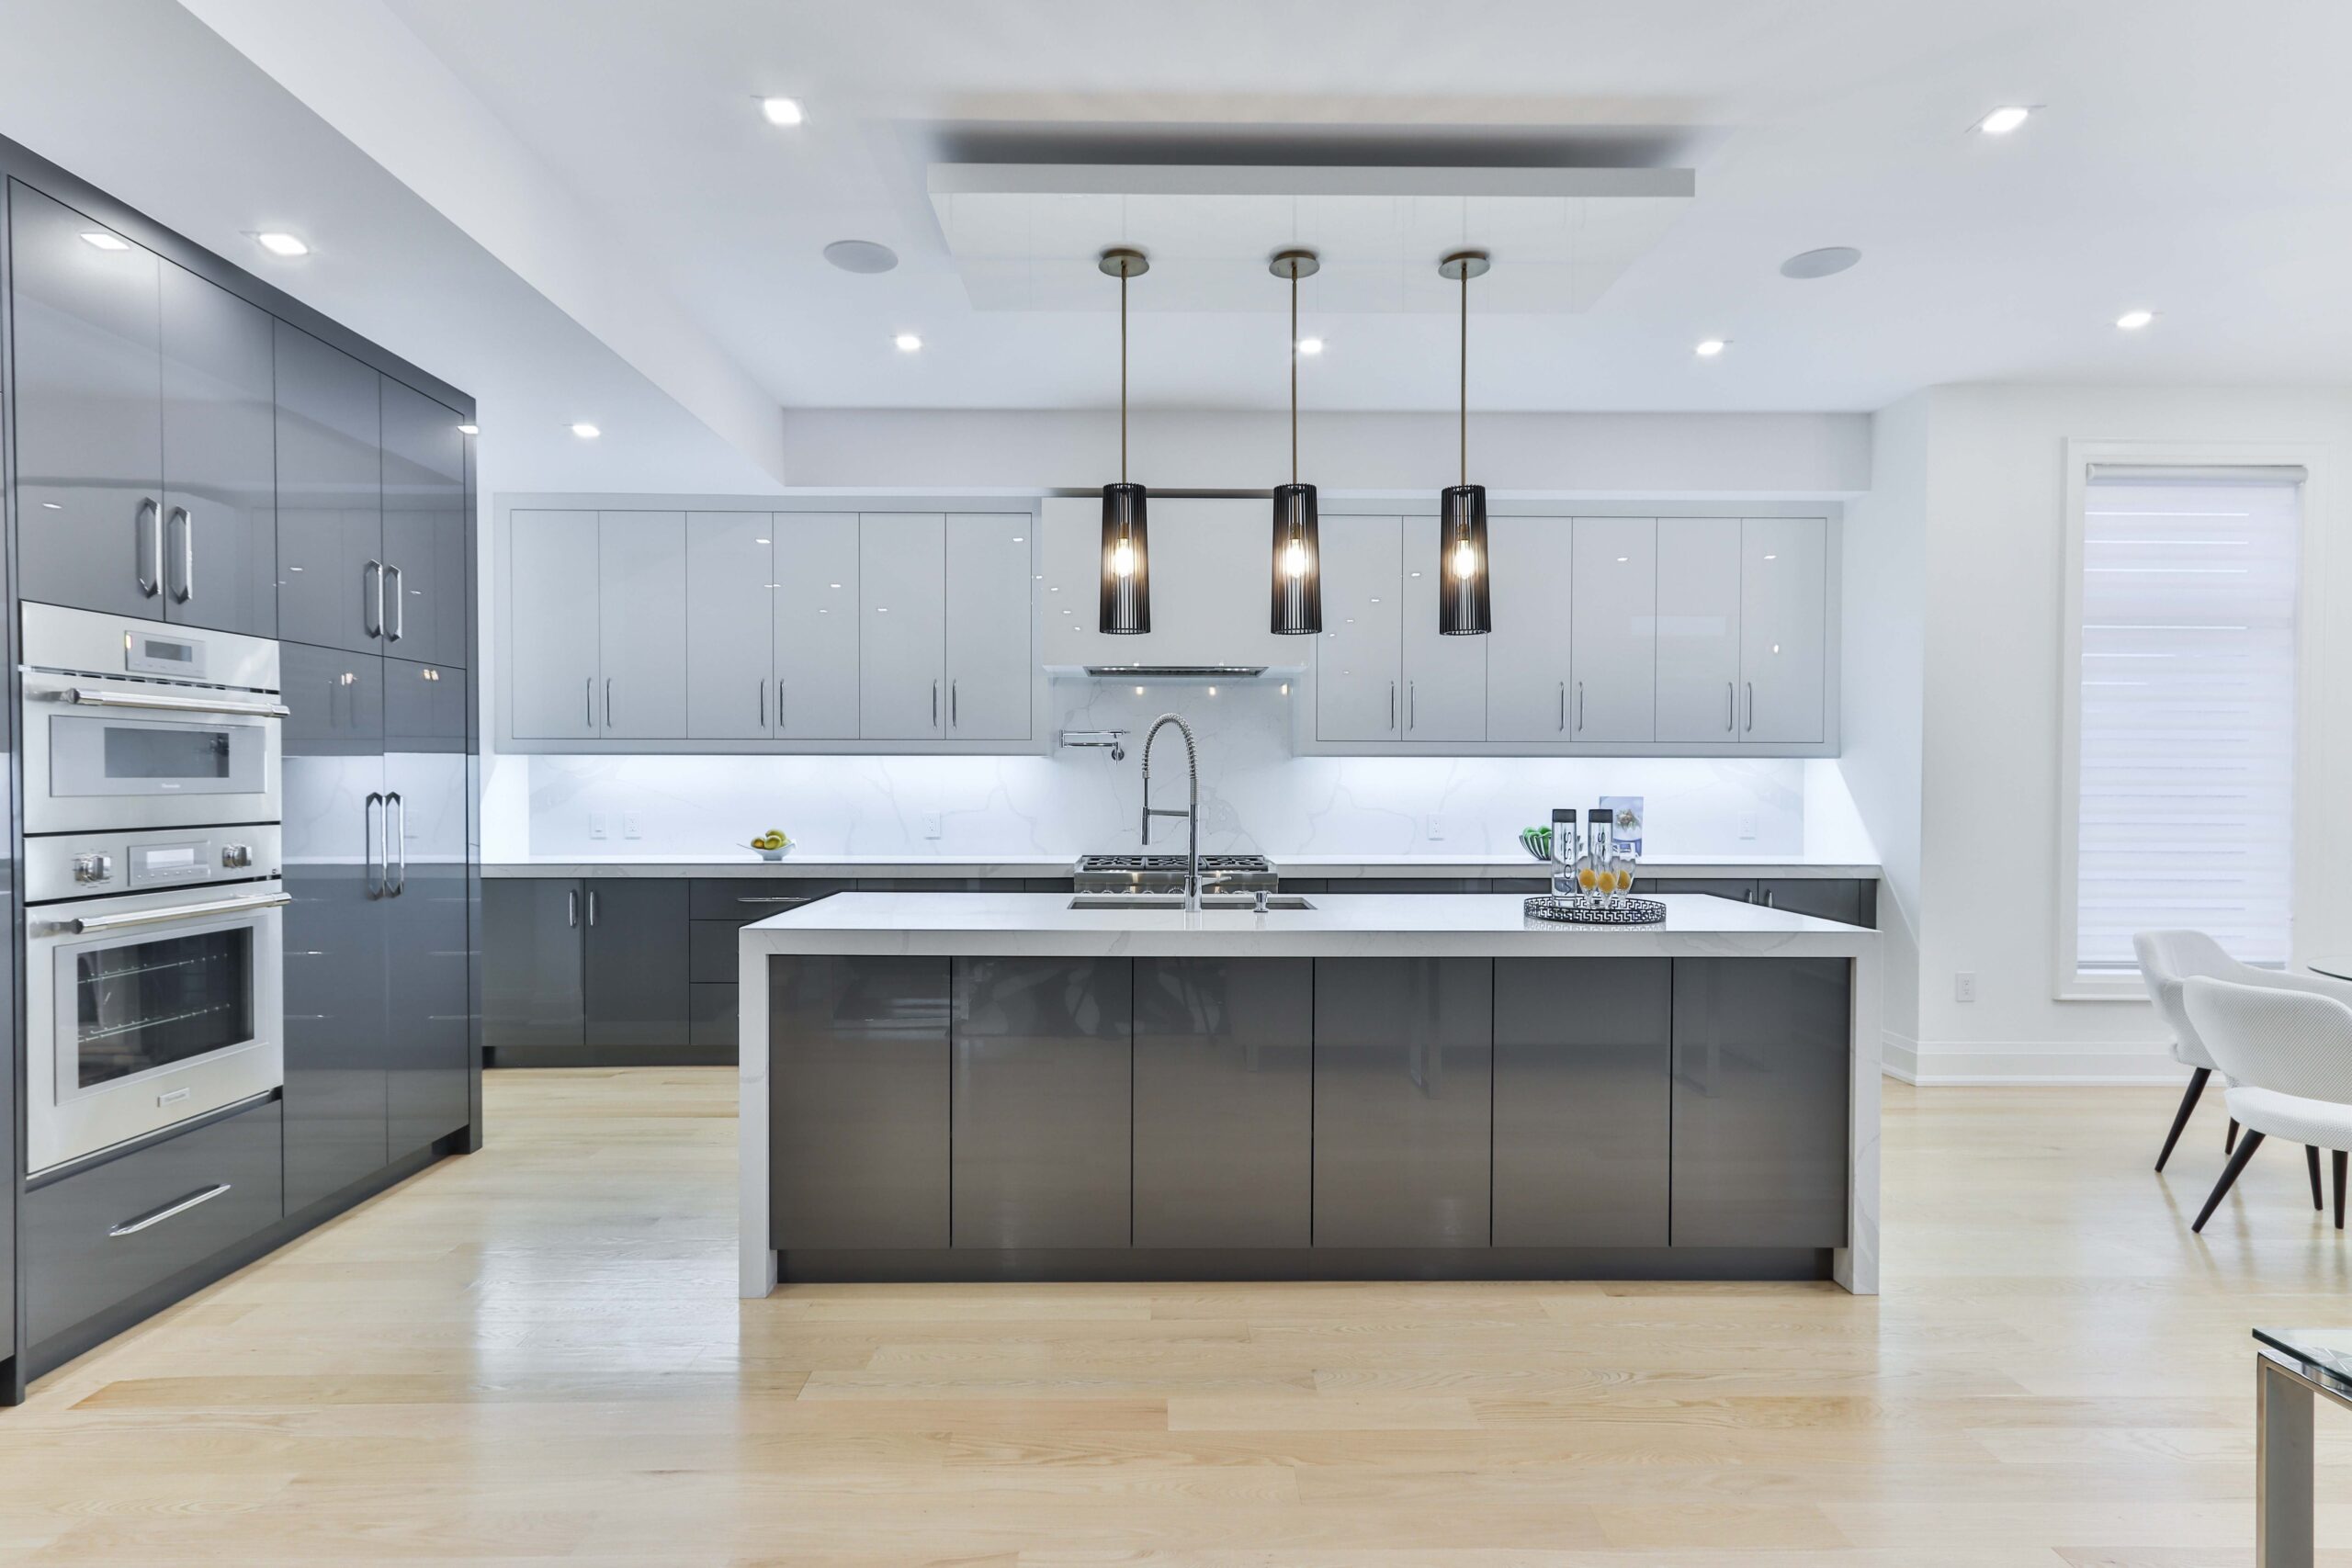 Laminate Or Acrylic Kitchen: Which Kitchen Cabinet Finish is the Best?